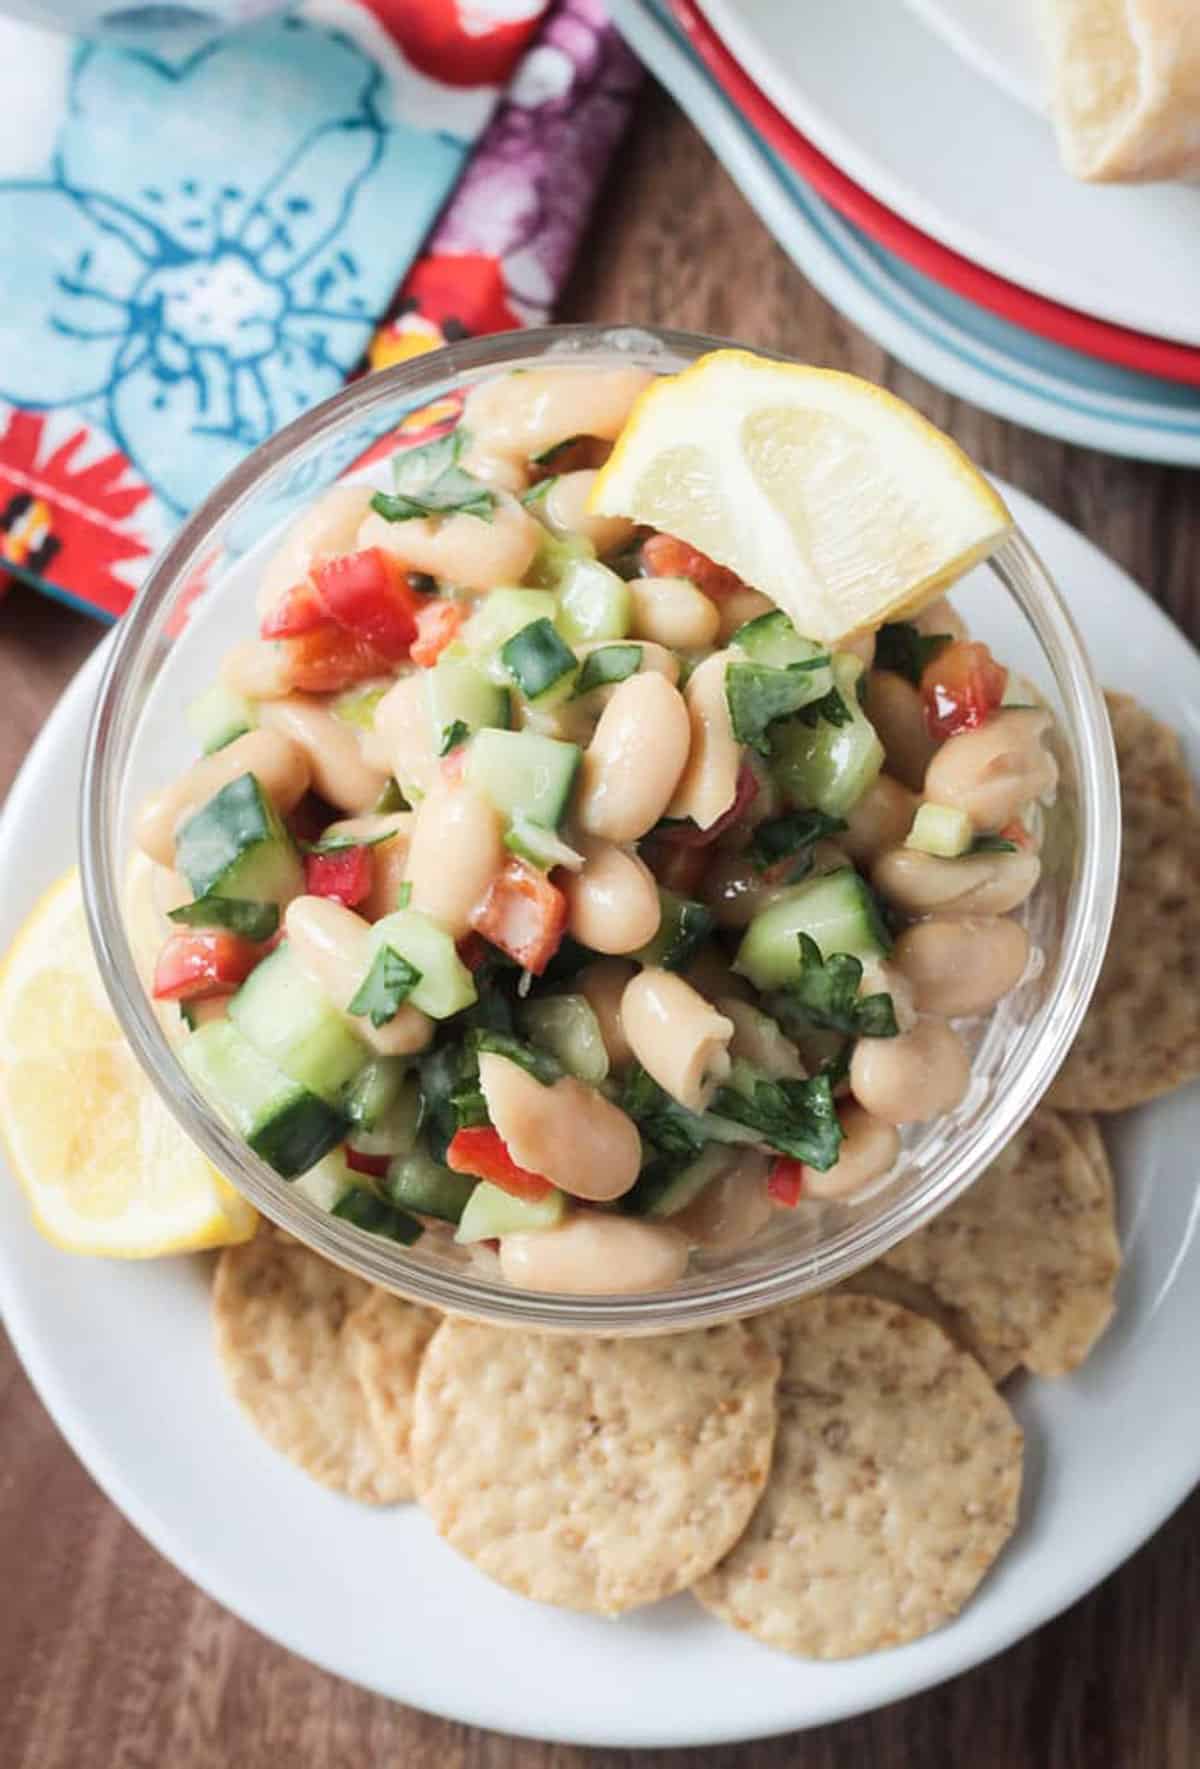 White bean salad in a bowl on a plate with crackers.